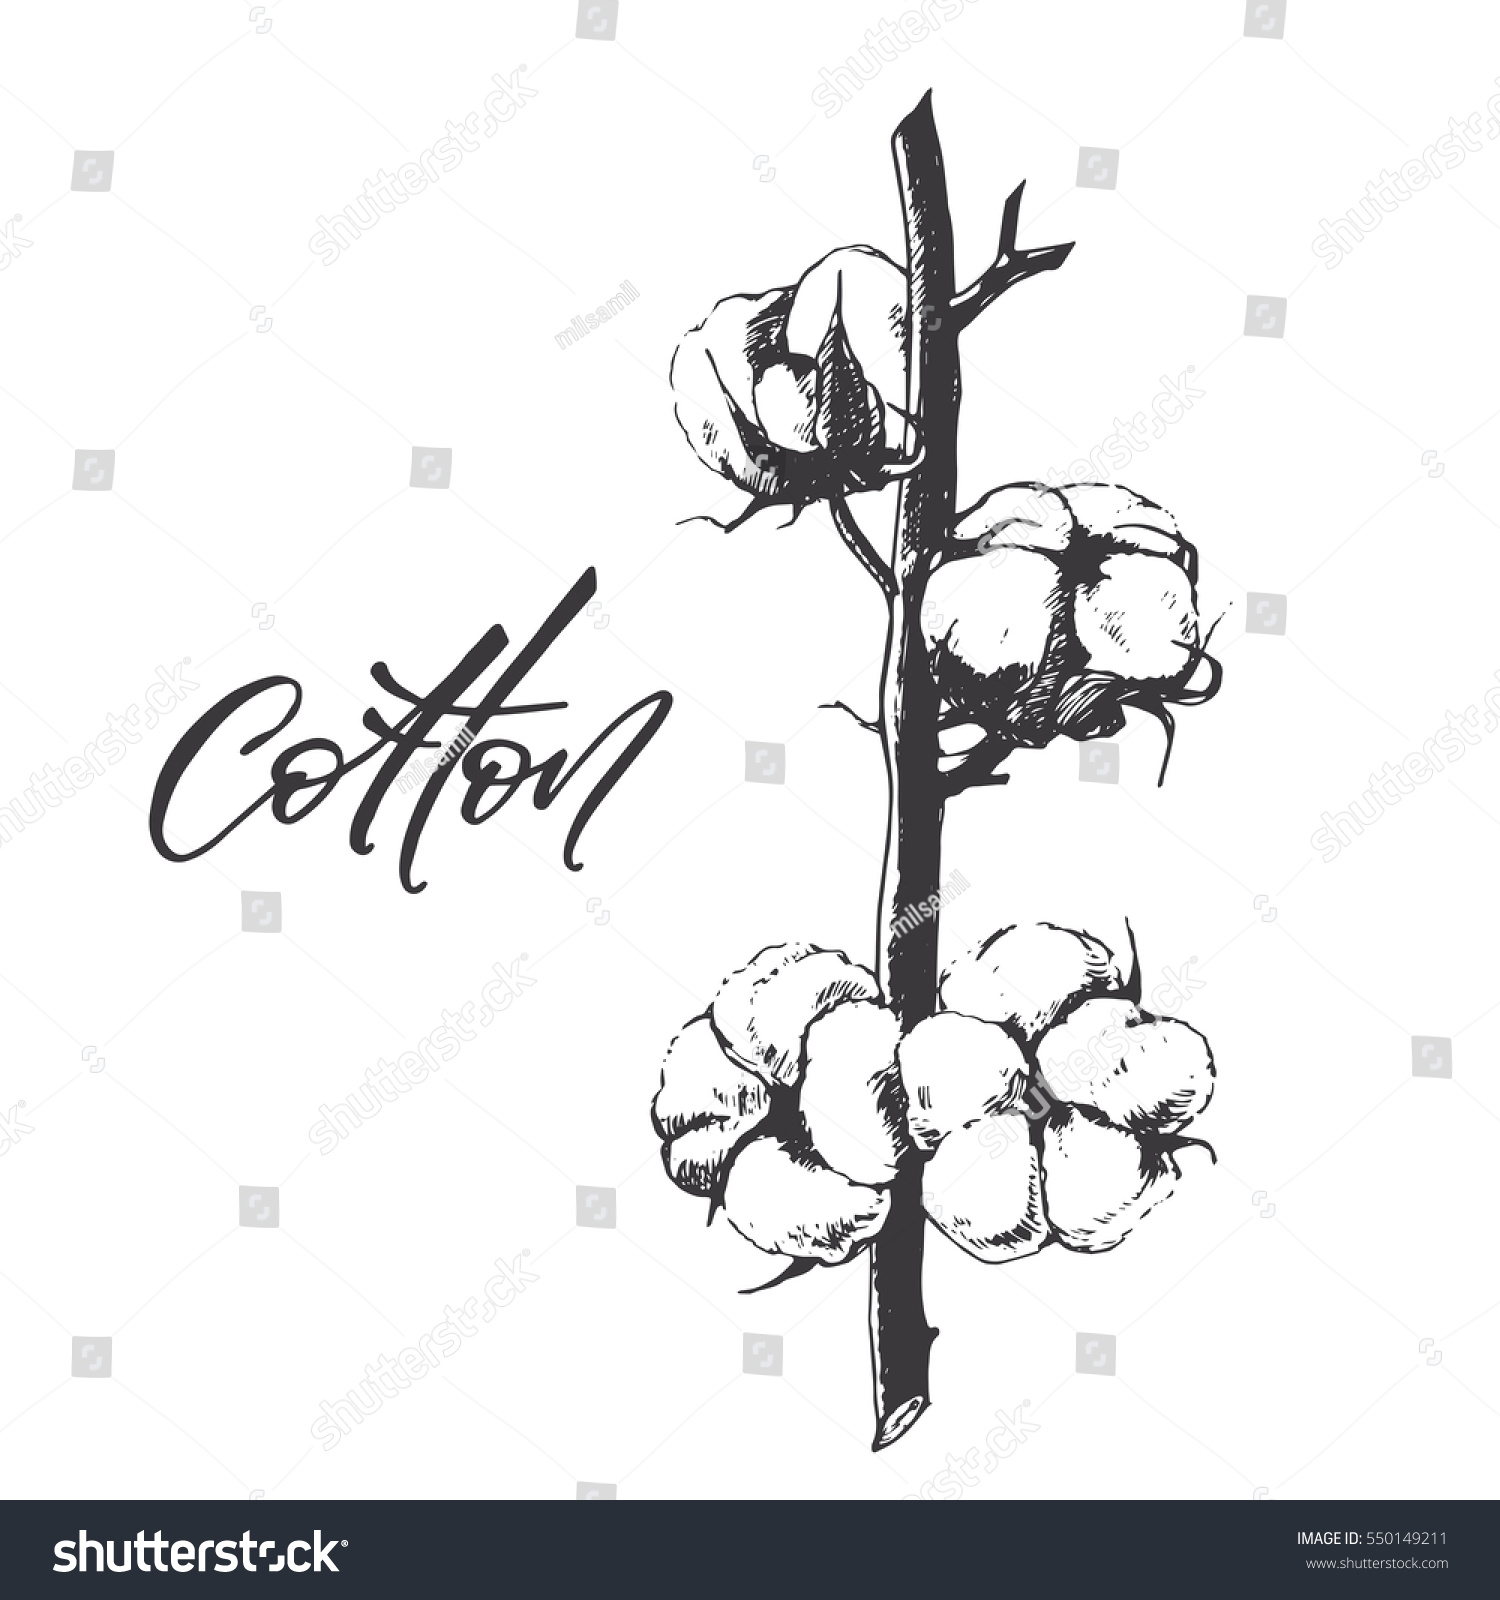 Hand drawing cotton plant sketch with calligraphy, vector illustration on white background #550149211